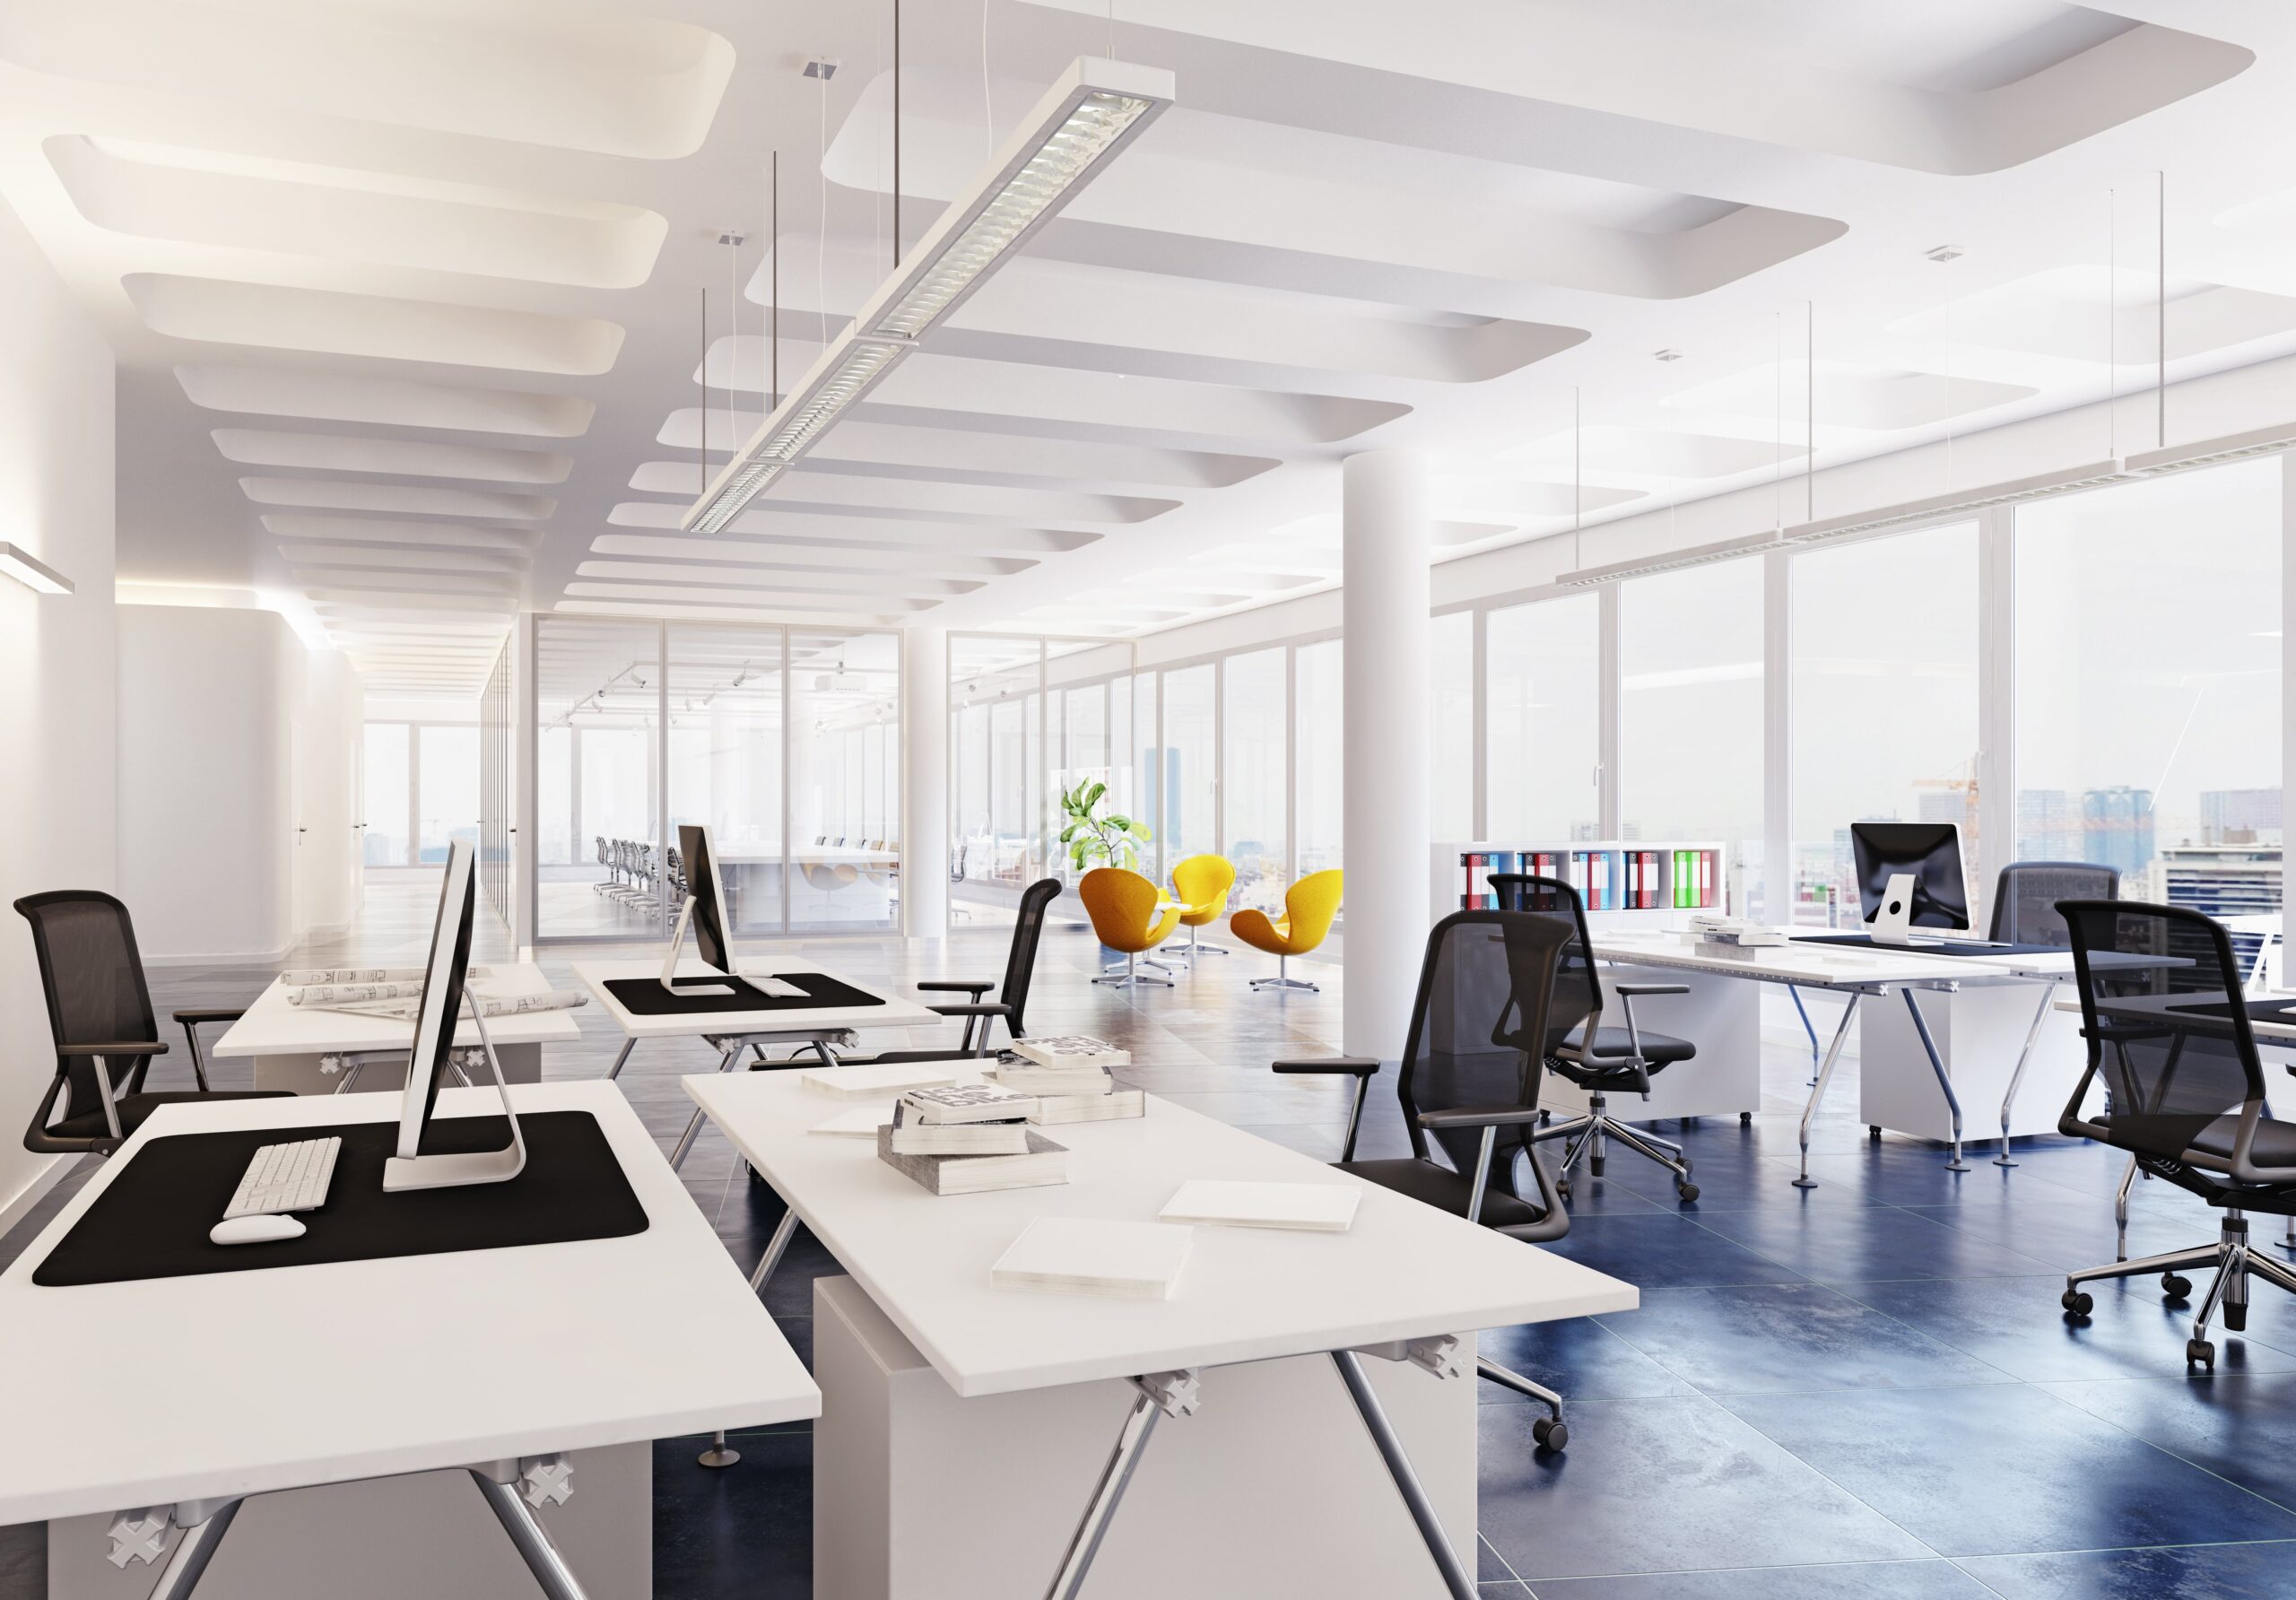 Top Office Design Ideas For 2022 That Every Business Owner Should Know!